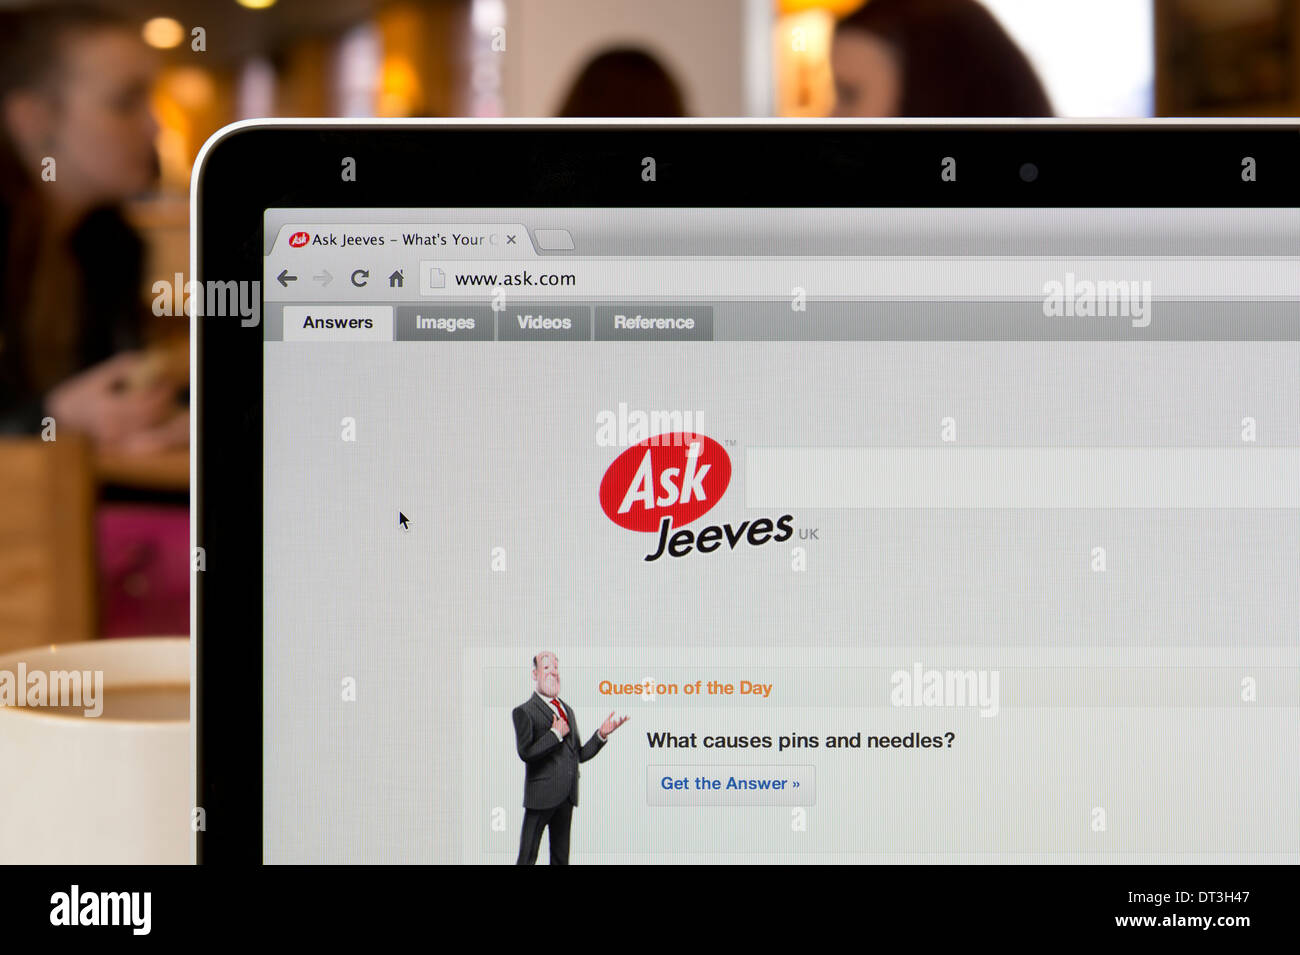 The Ask Jeeves website shot in a coffee shop environment (Editorial use only: print, TV, e-book and editorial website). Stock Photo